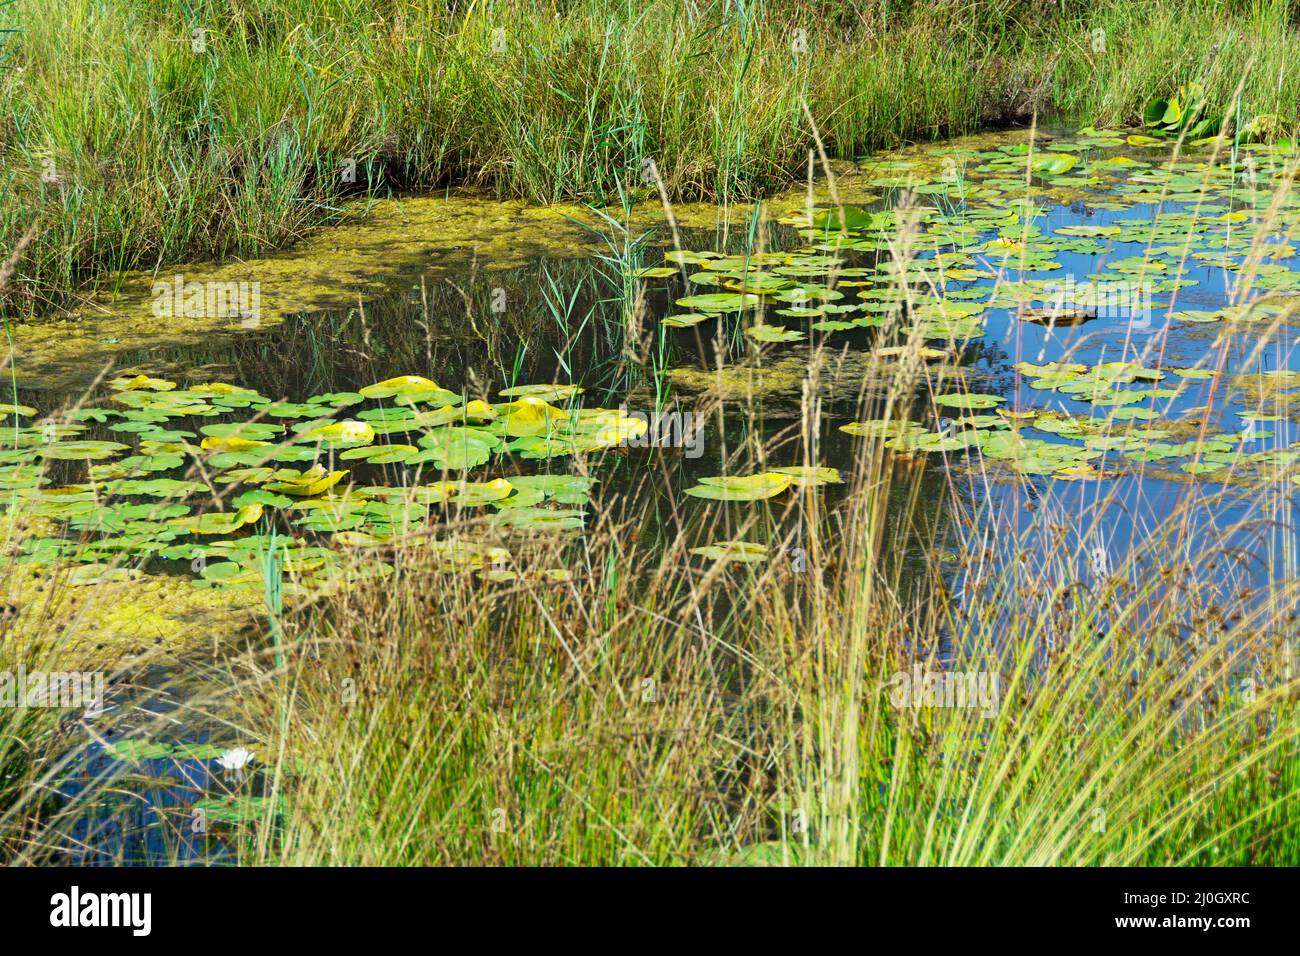 Wetland habitat with water lilies and other aquatic plants Stock Photo